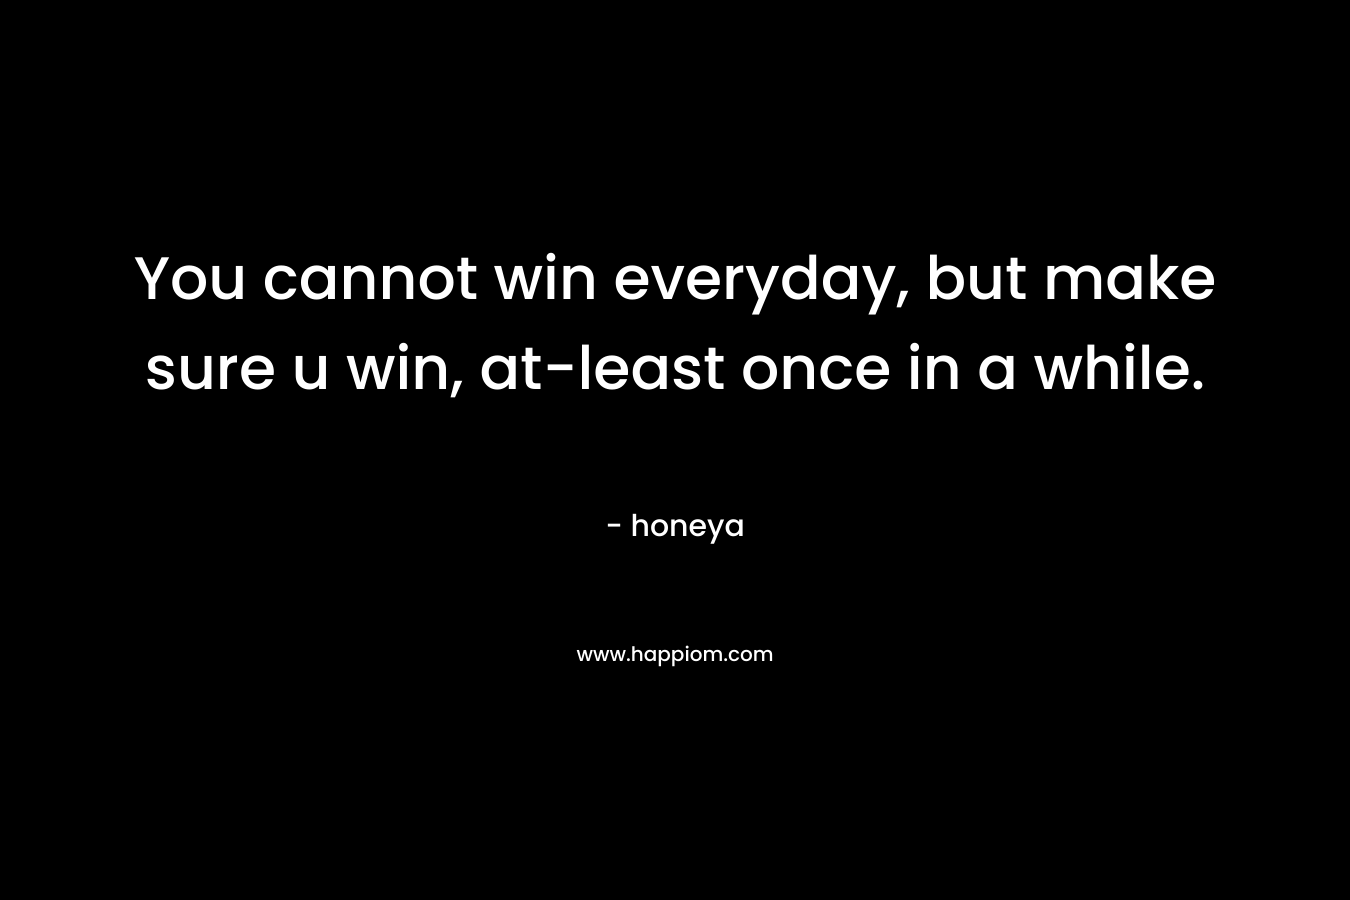 You cannot win everyday, but make sure u win, at-least once in a while. – honeya